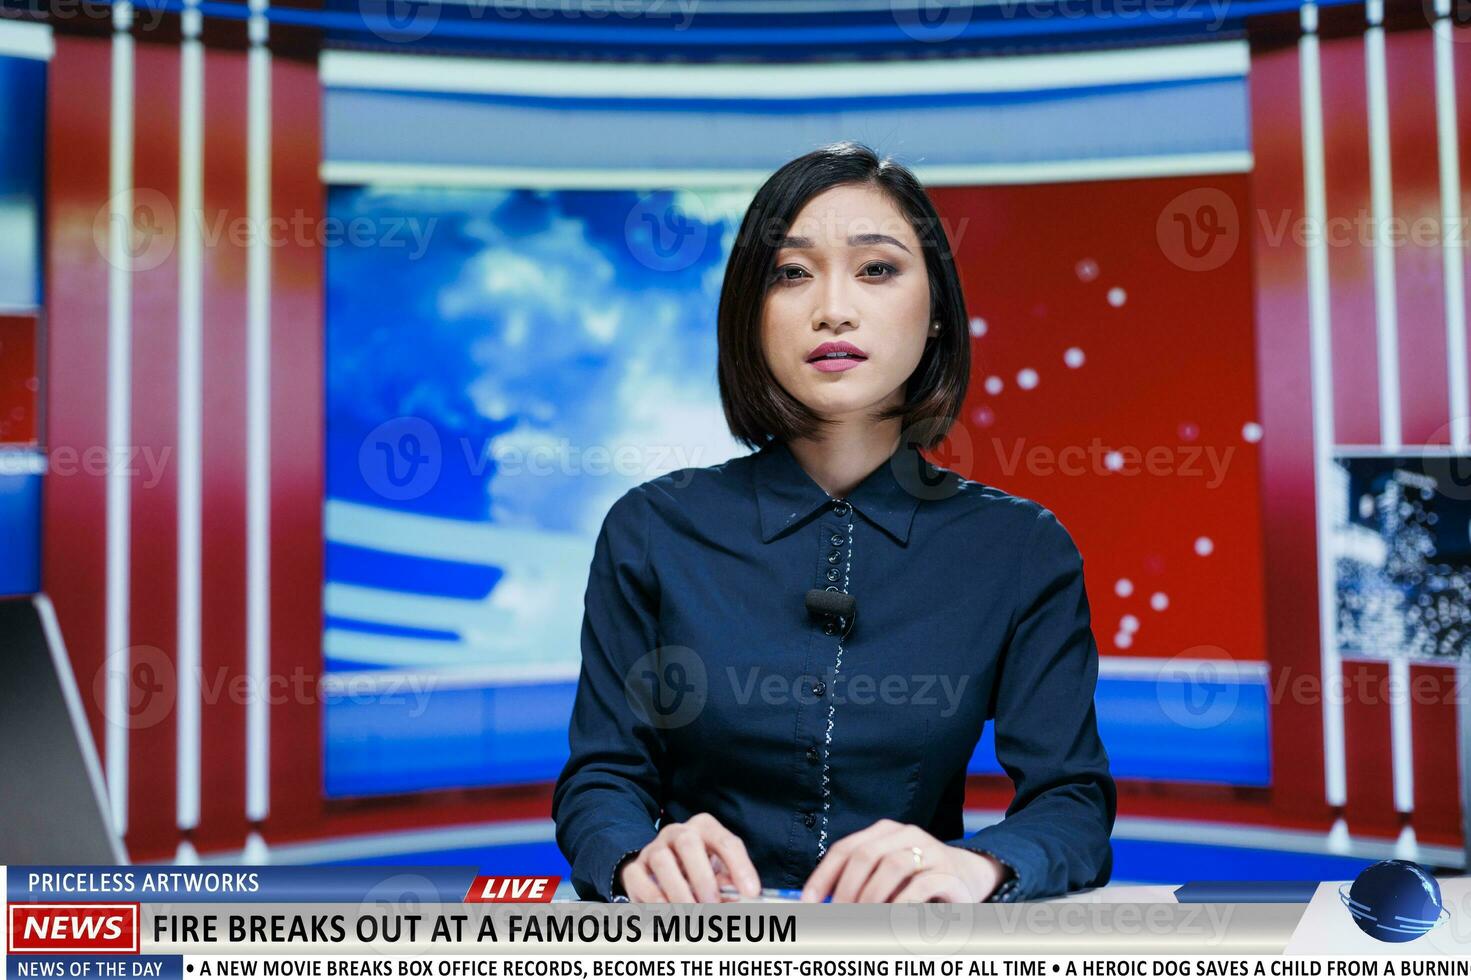 Anchorwoman talks about fire at museum on international news channel, famous artifacts and artworks in danger after building started burning. Journalist reports disaster at historical landmark. photo